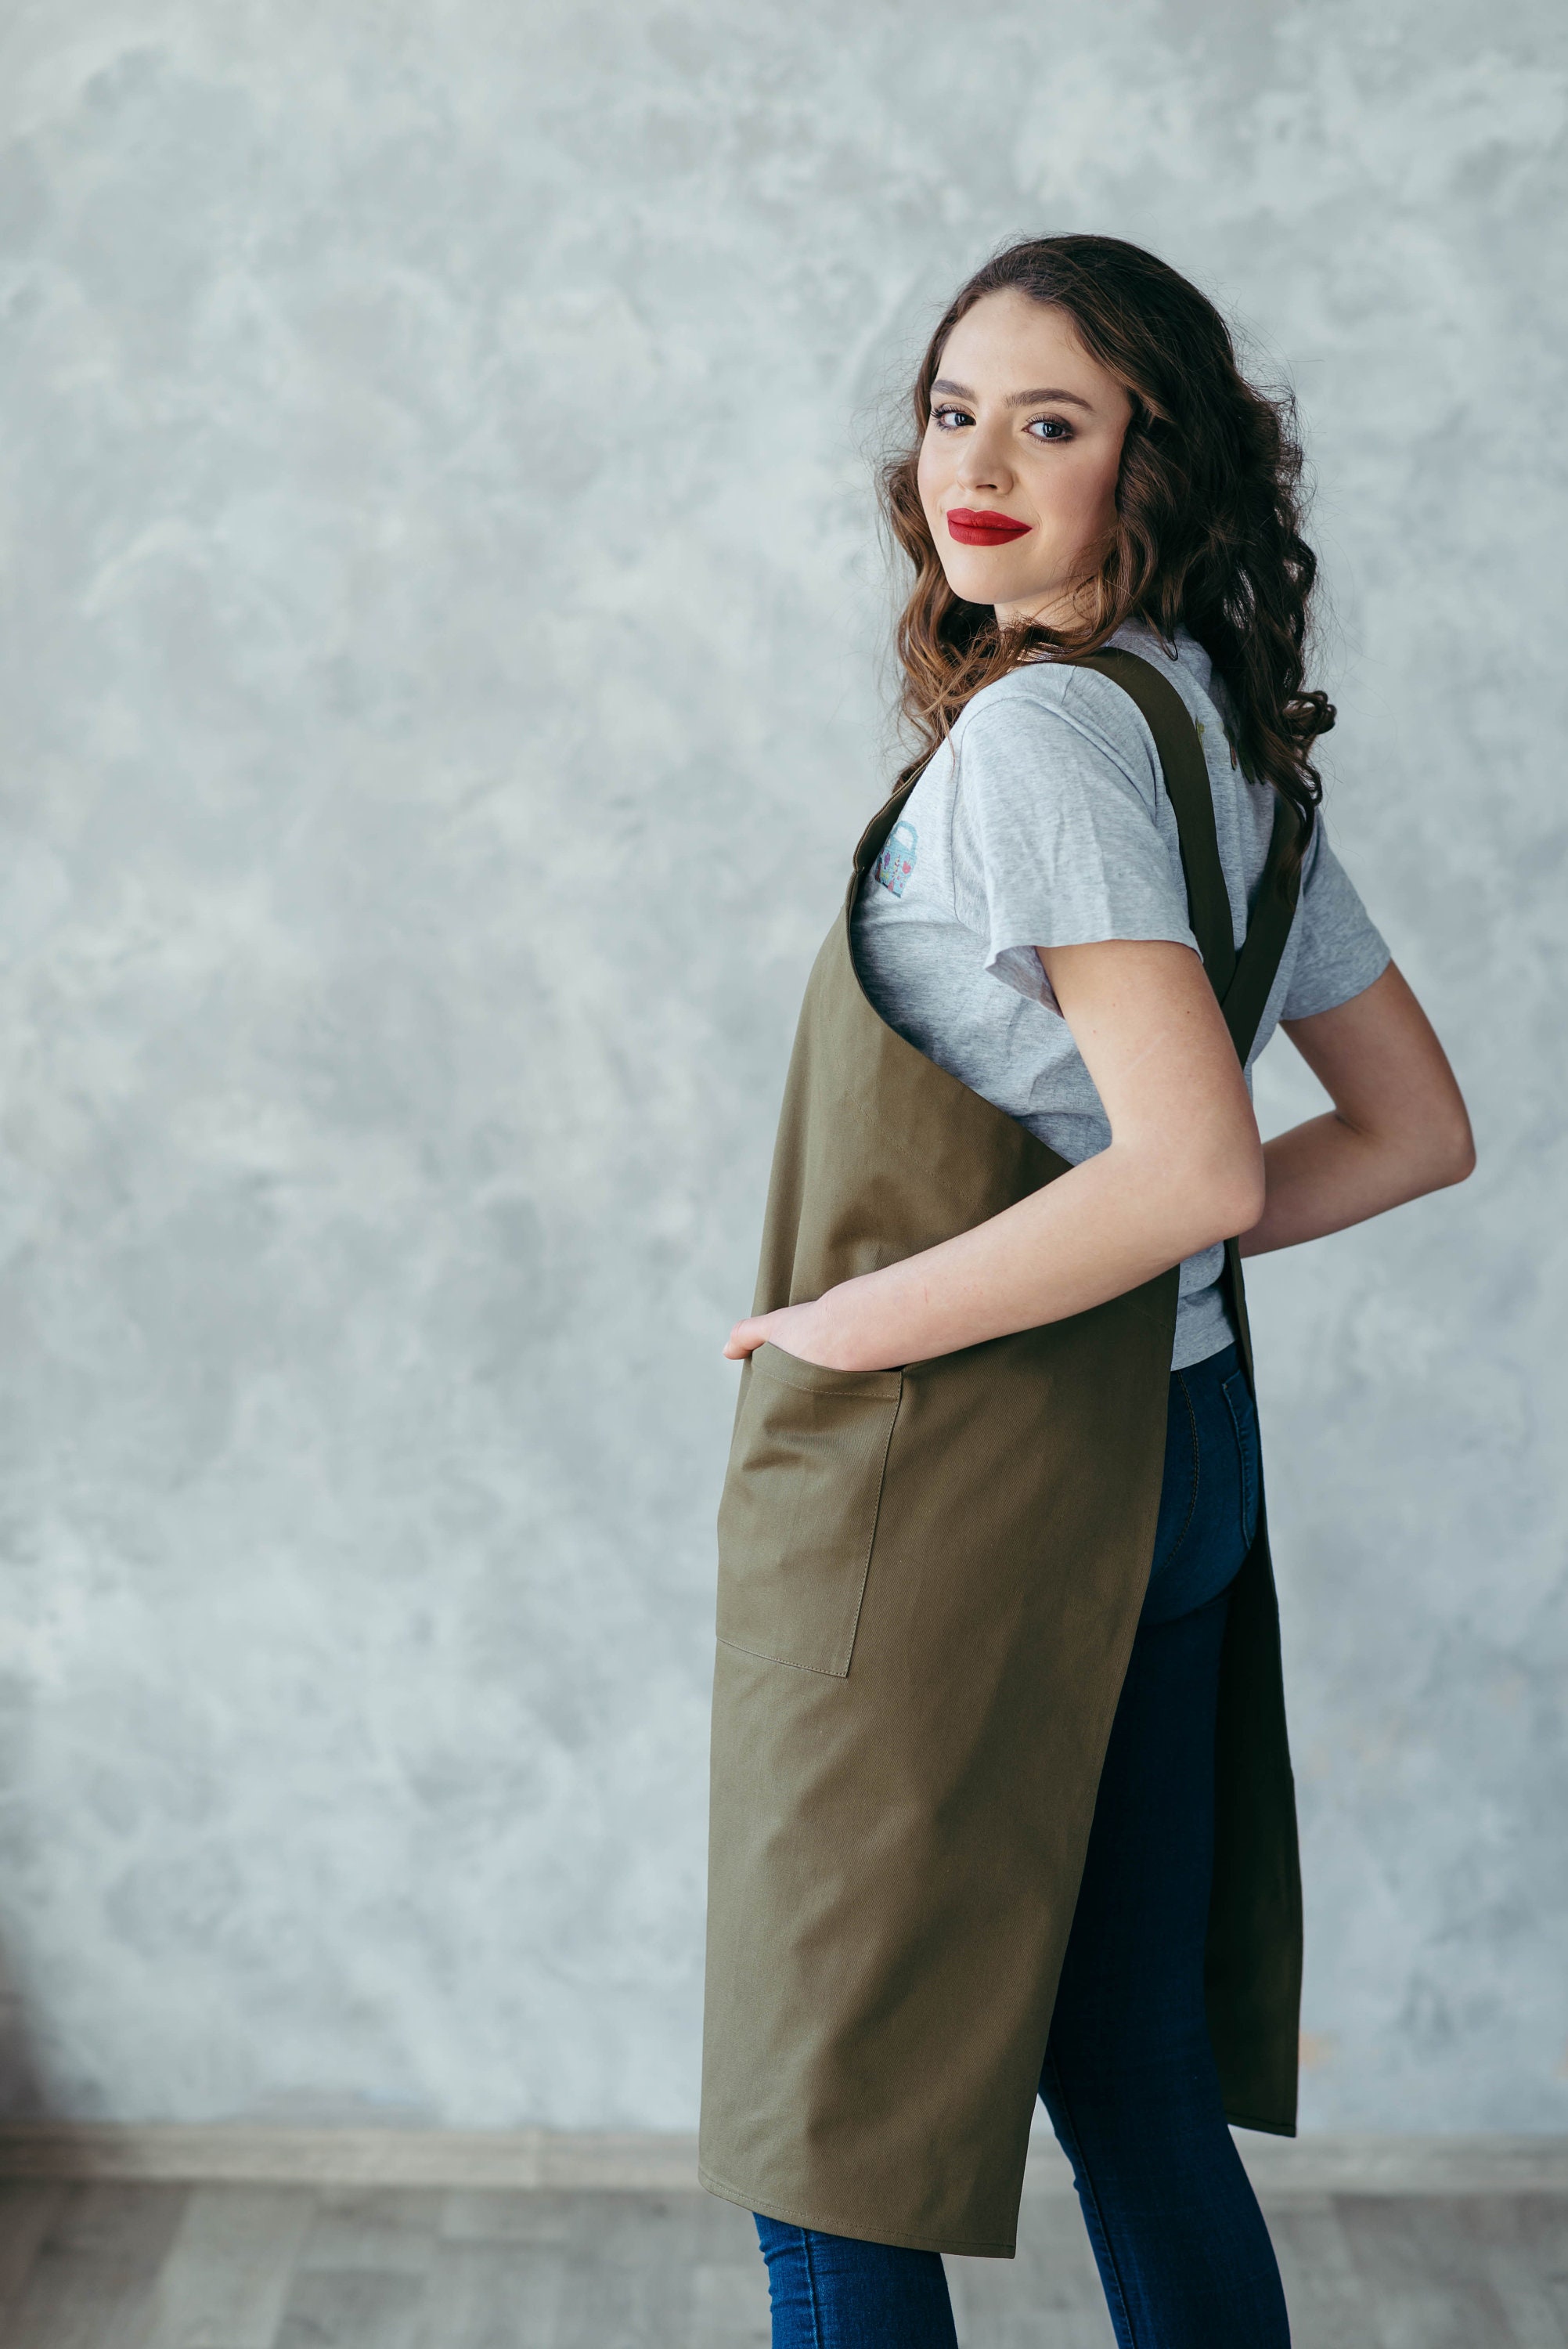 Smony Cooking Florist Chef Overalls Bib Garden Work Pinafore Dress British Rural Style Vintage 8-16 Women's Casual Striped Sleeveless Loose Aprons 